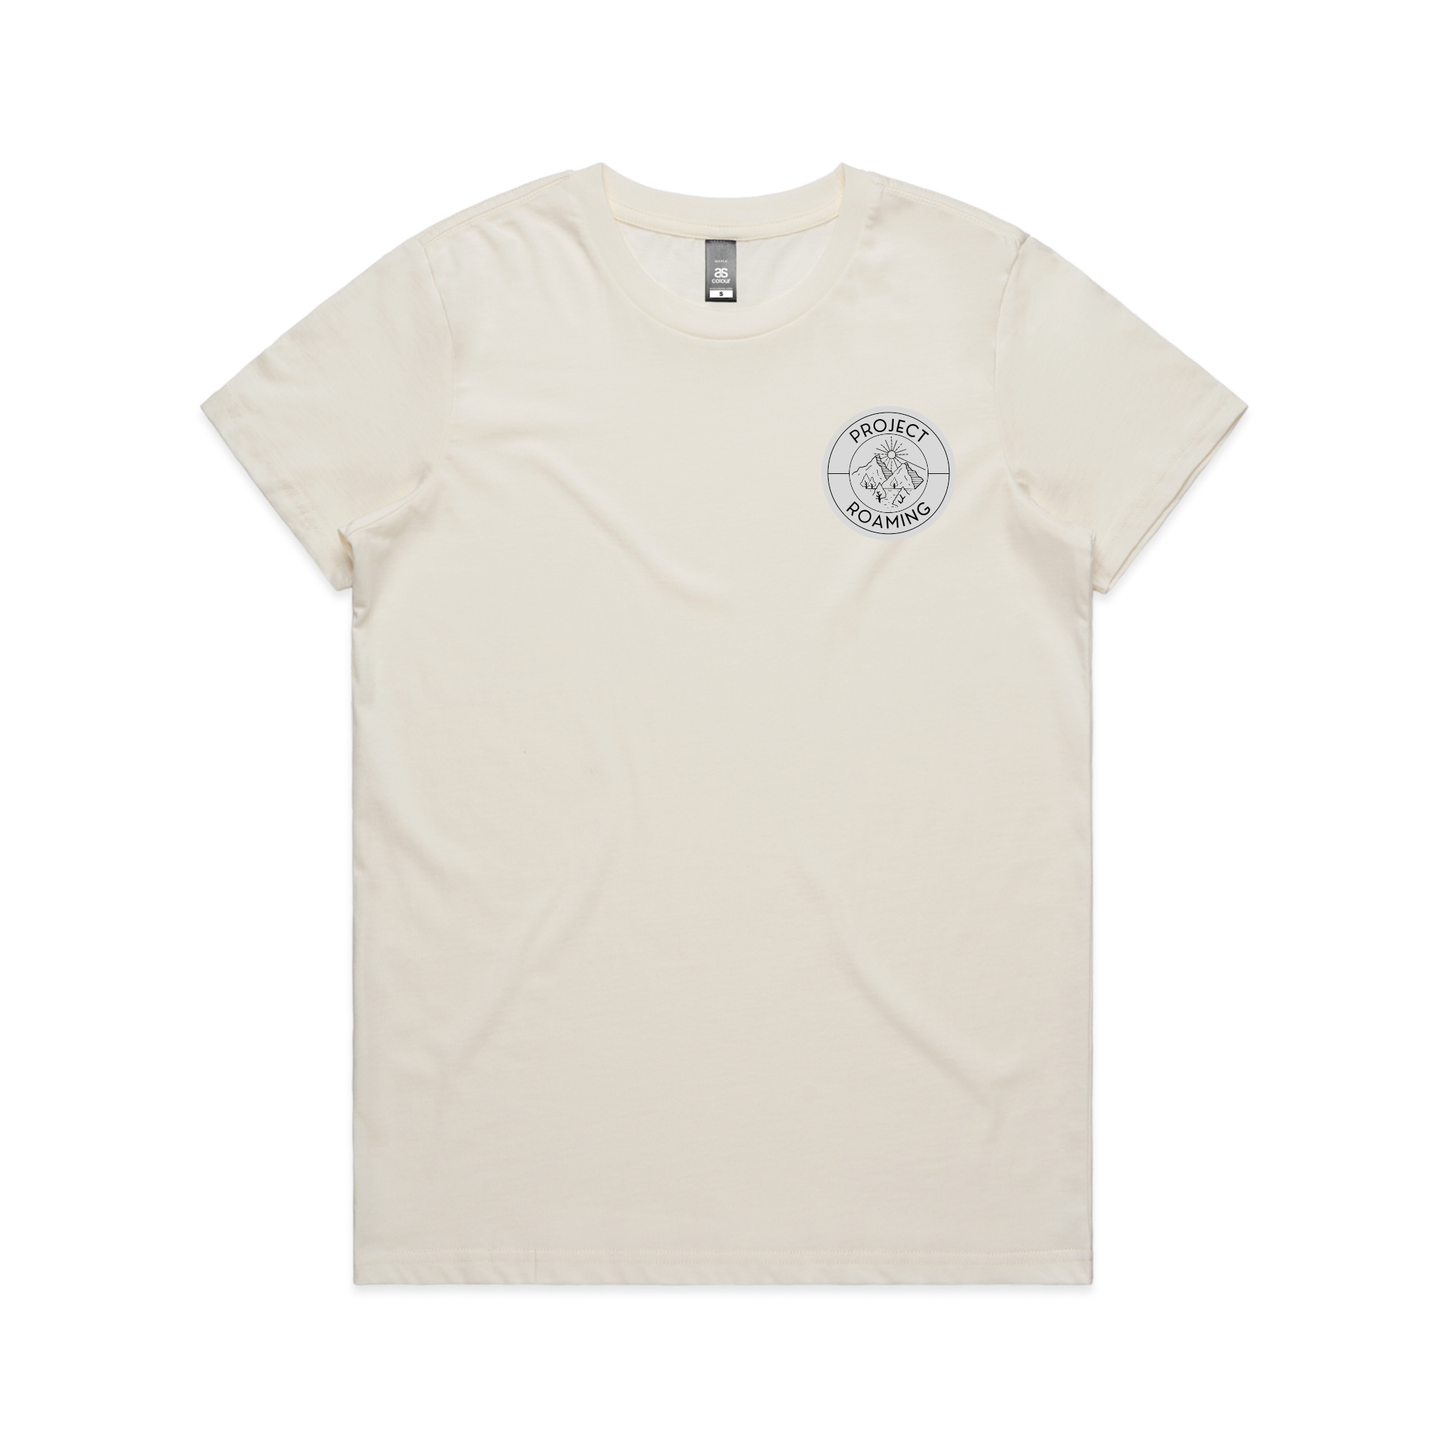 Project Roaming Womens Tee